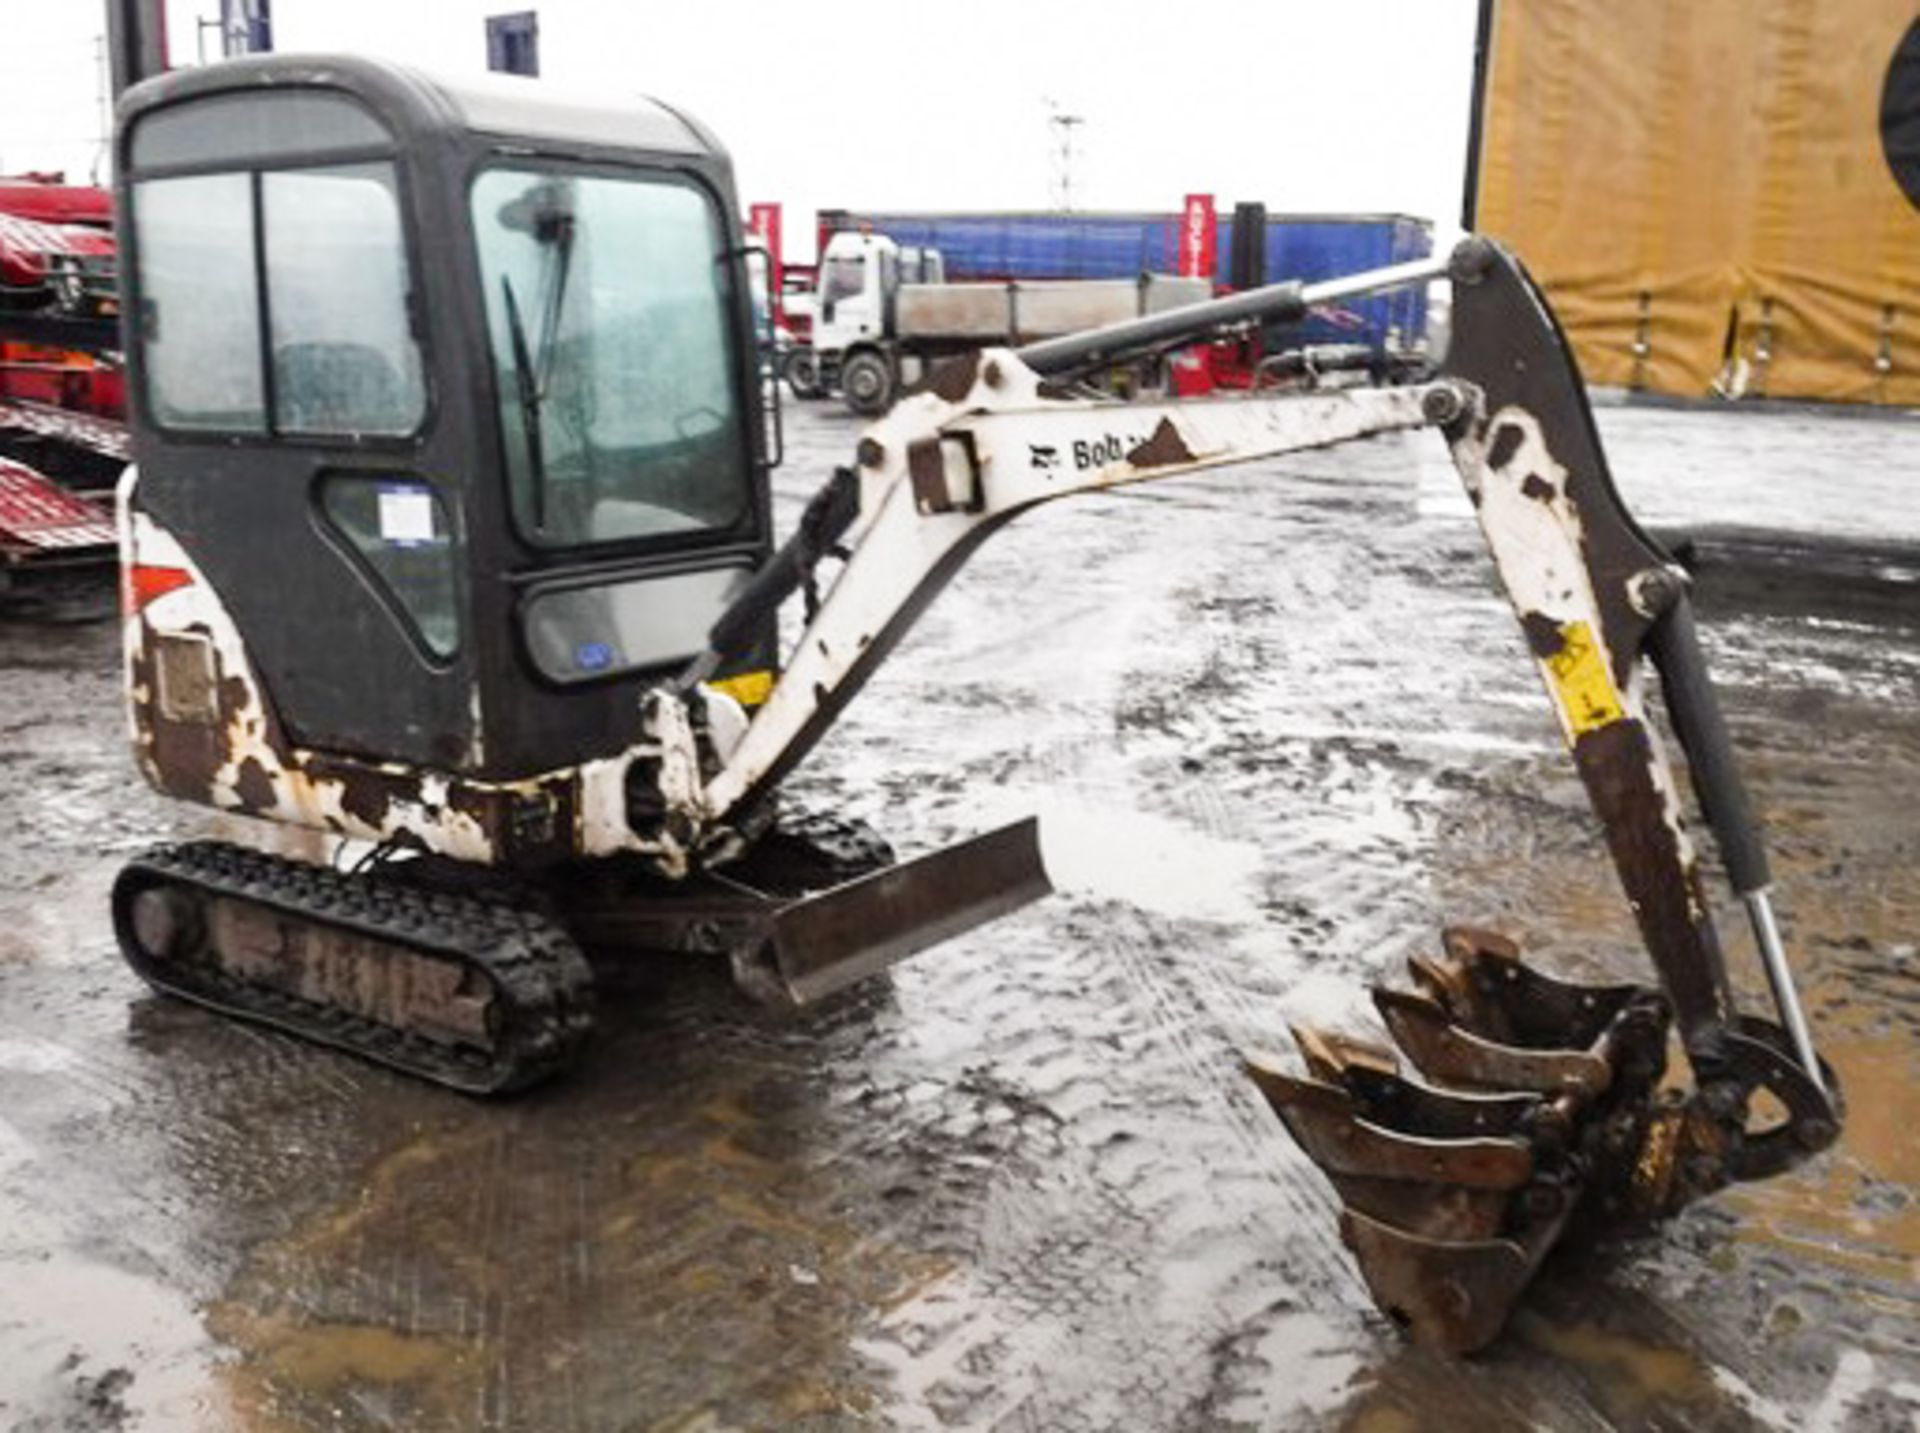 2011 BOBCAT E16, S/N AHLL11016, 2101HRS (NOT VERIFIED), 3 BUCKETS, OPERATING WEIGHT 1.6T - Image 9 of 15